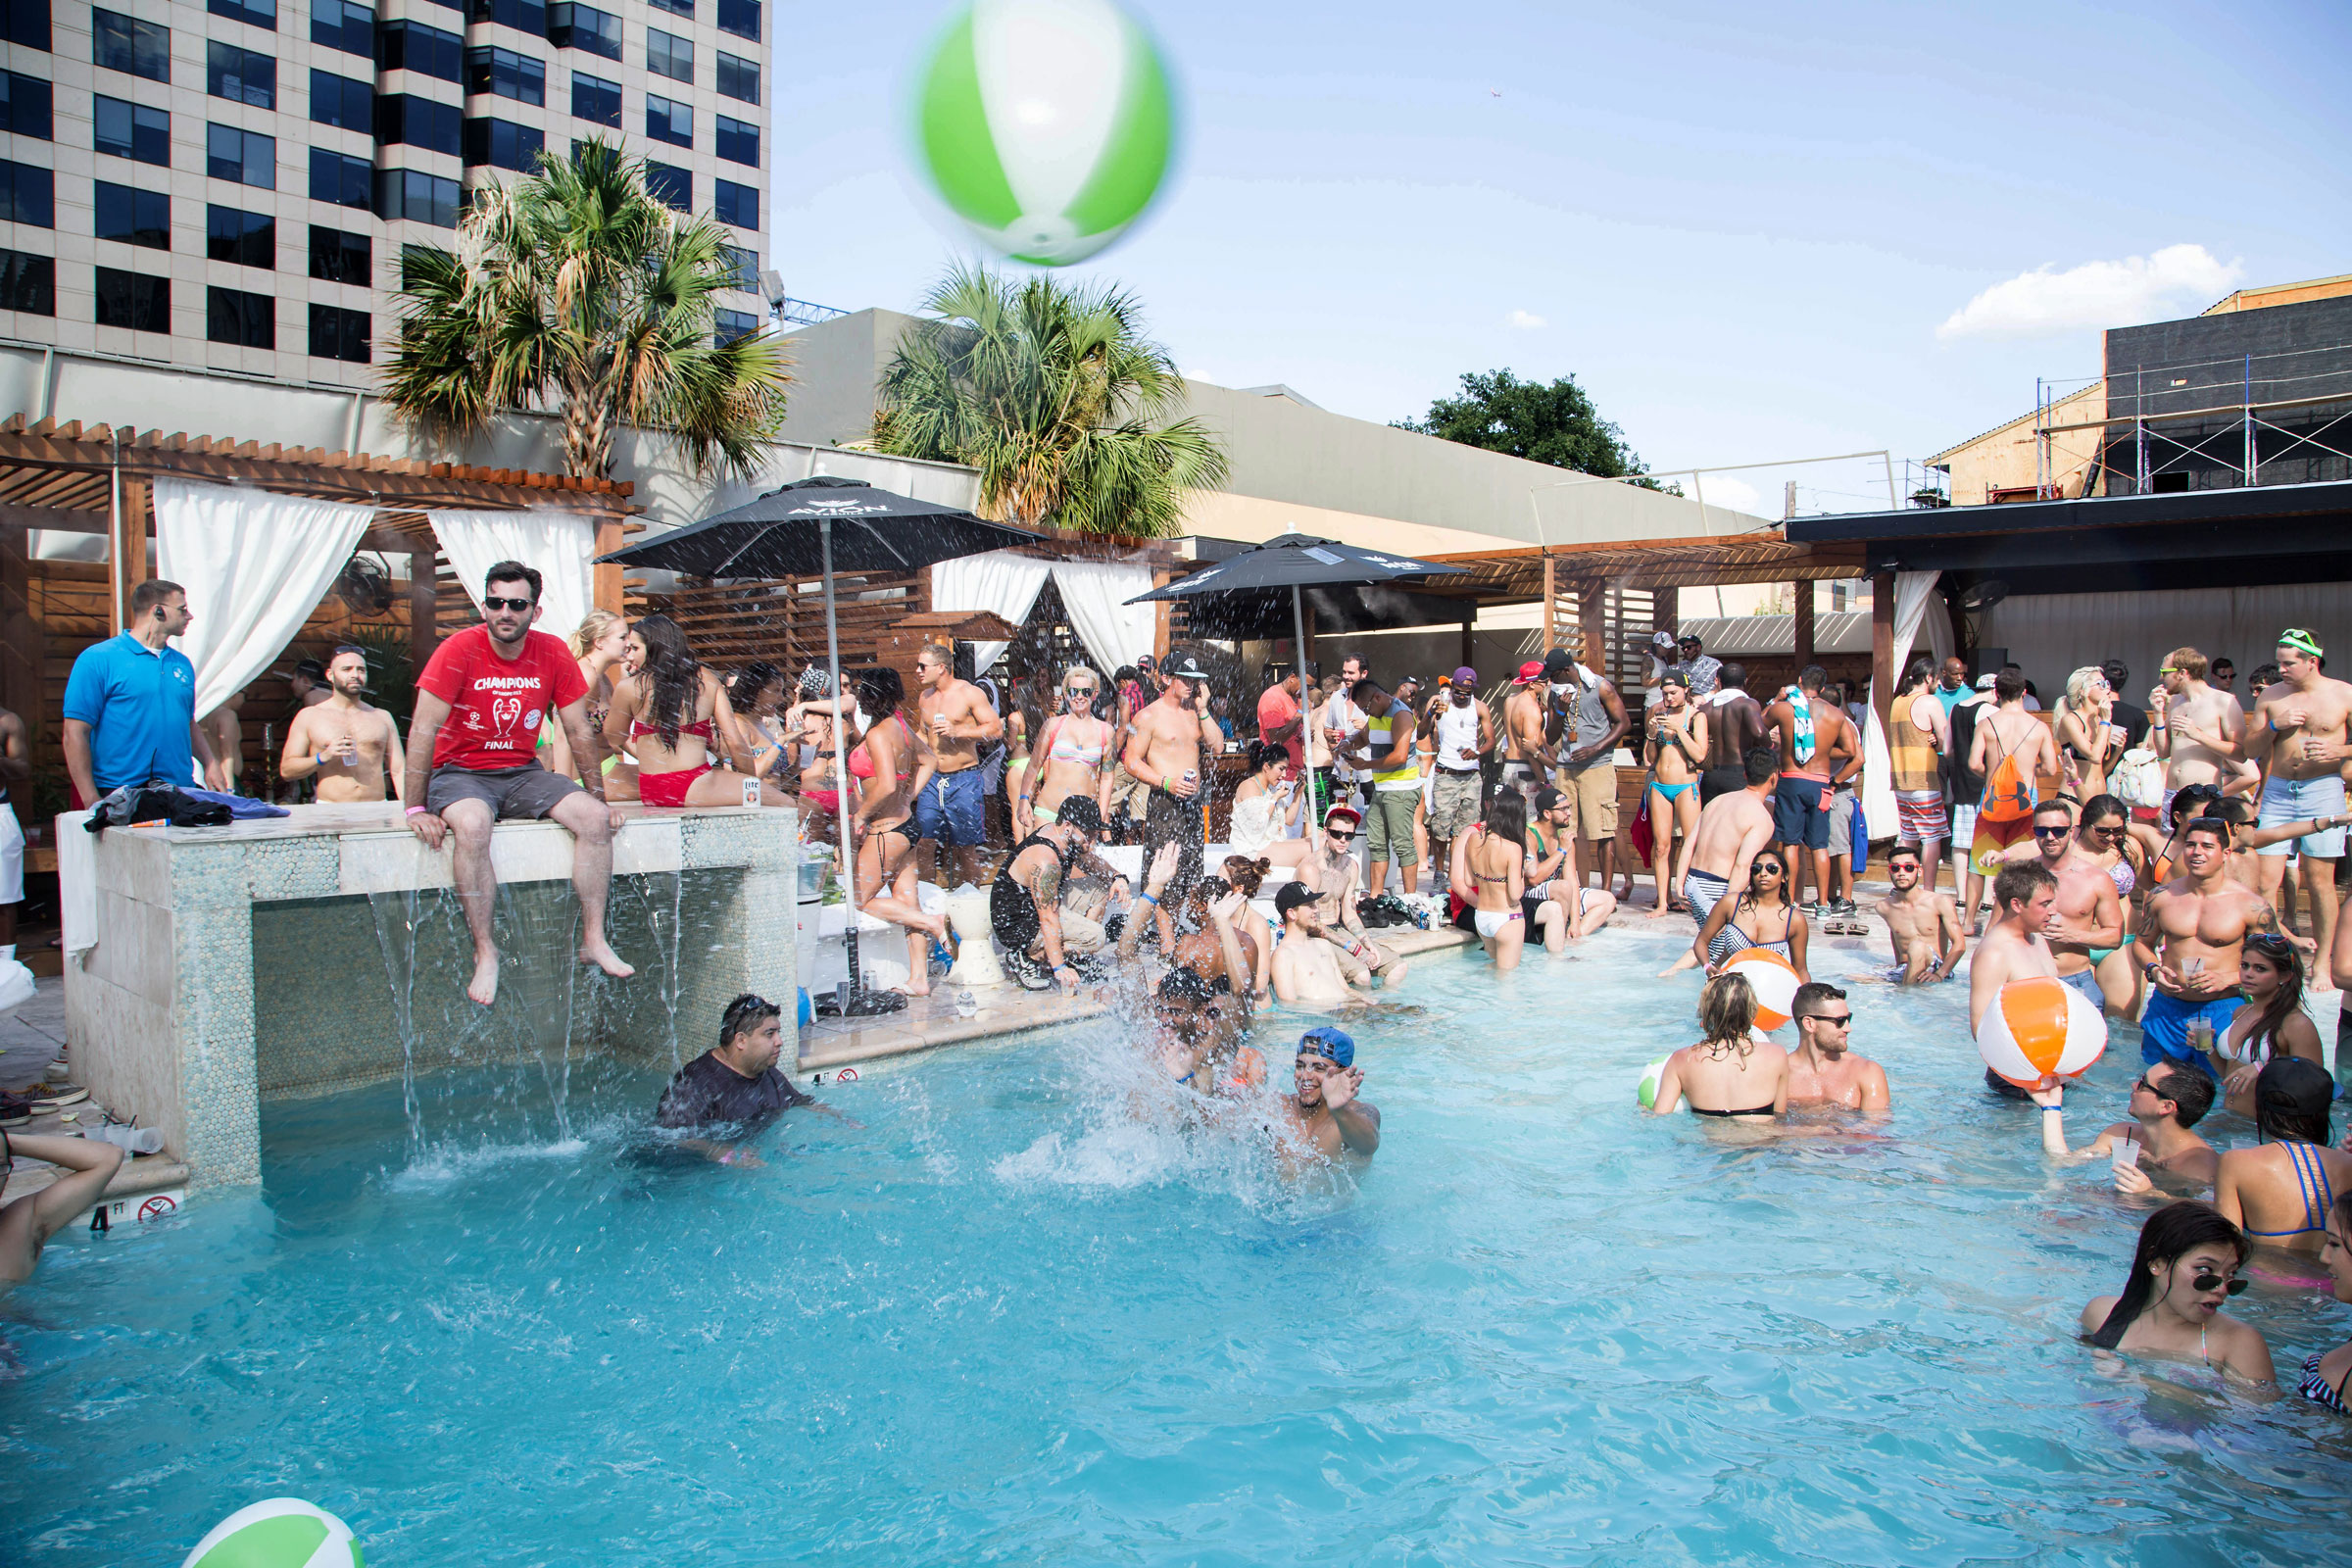 7 Dallas Pools to Sip and Swim at This Summer - D Magazine